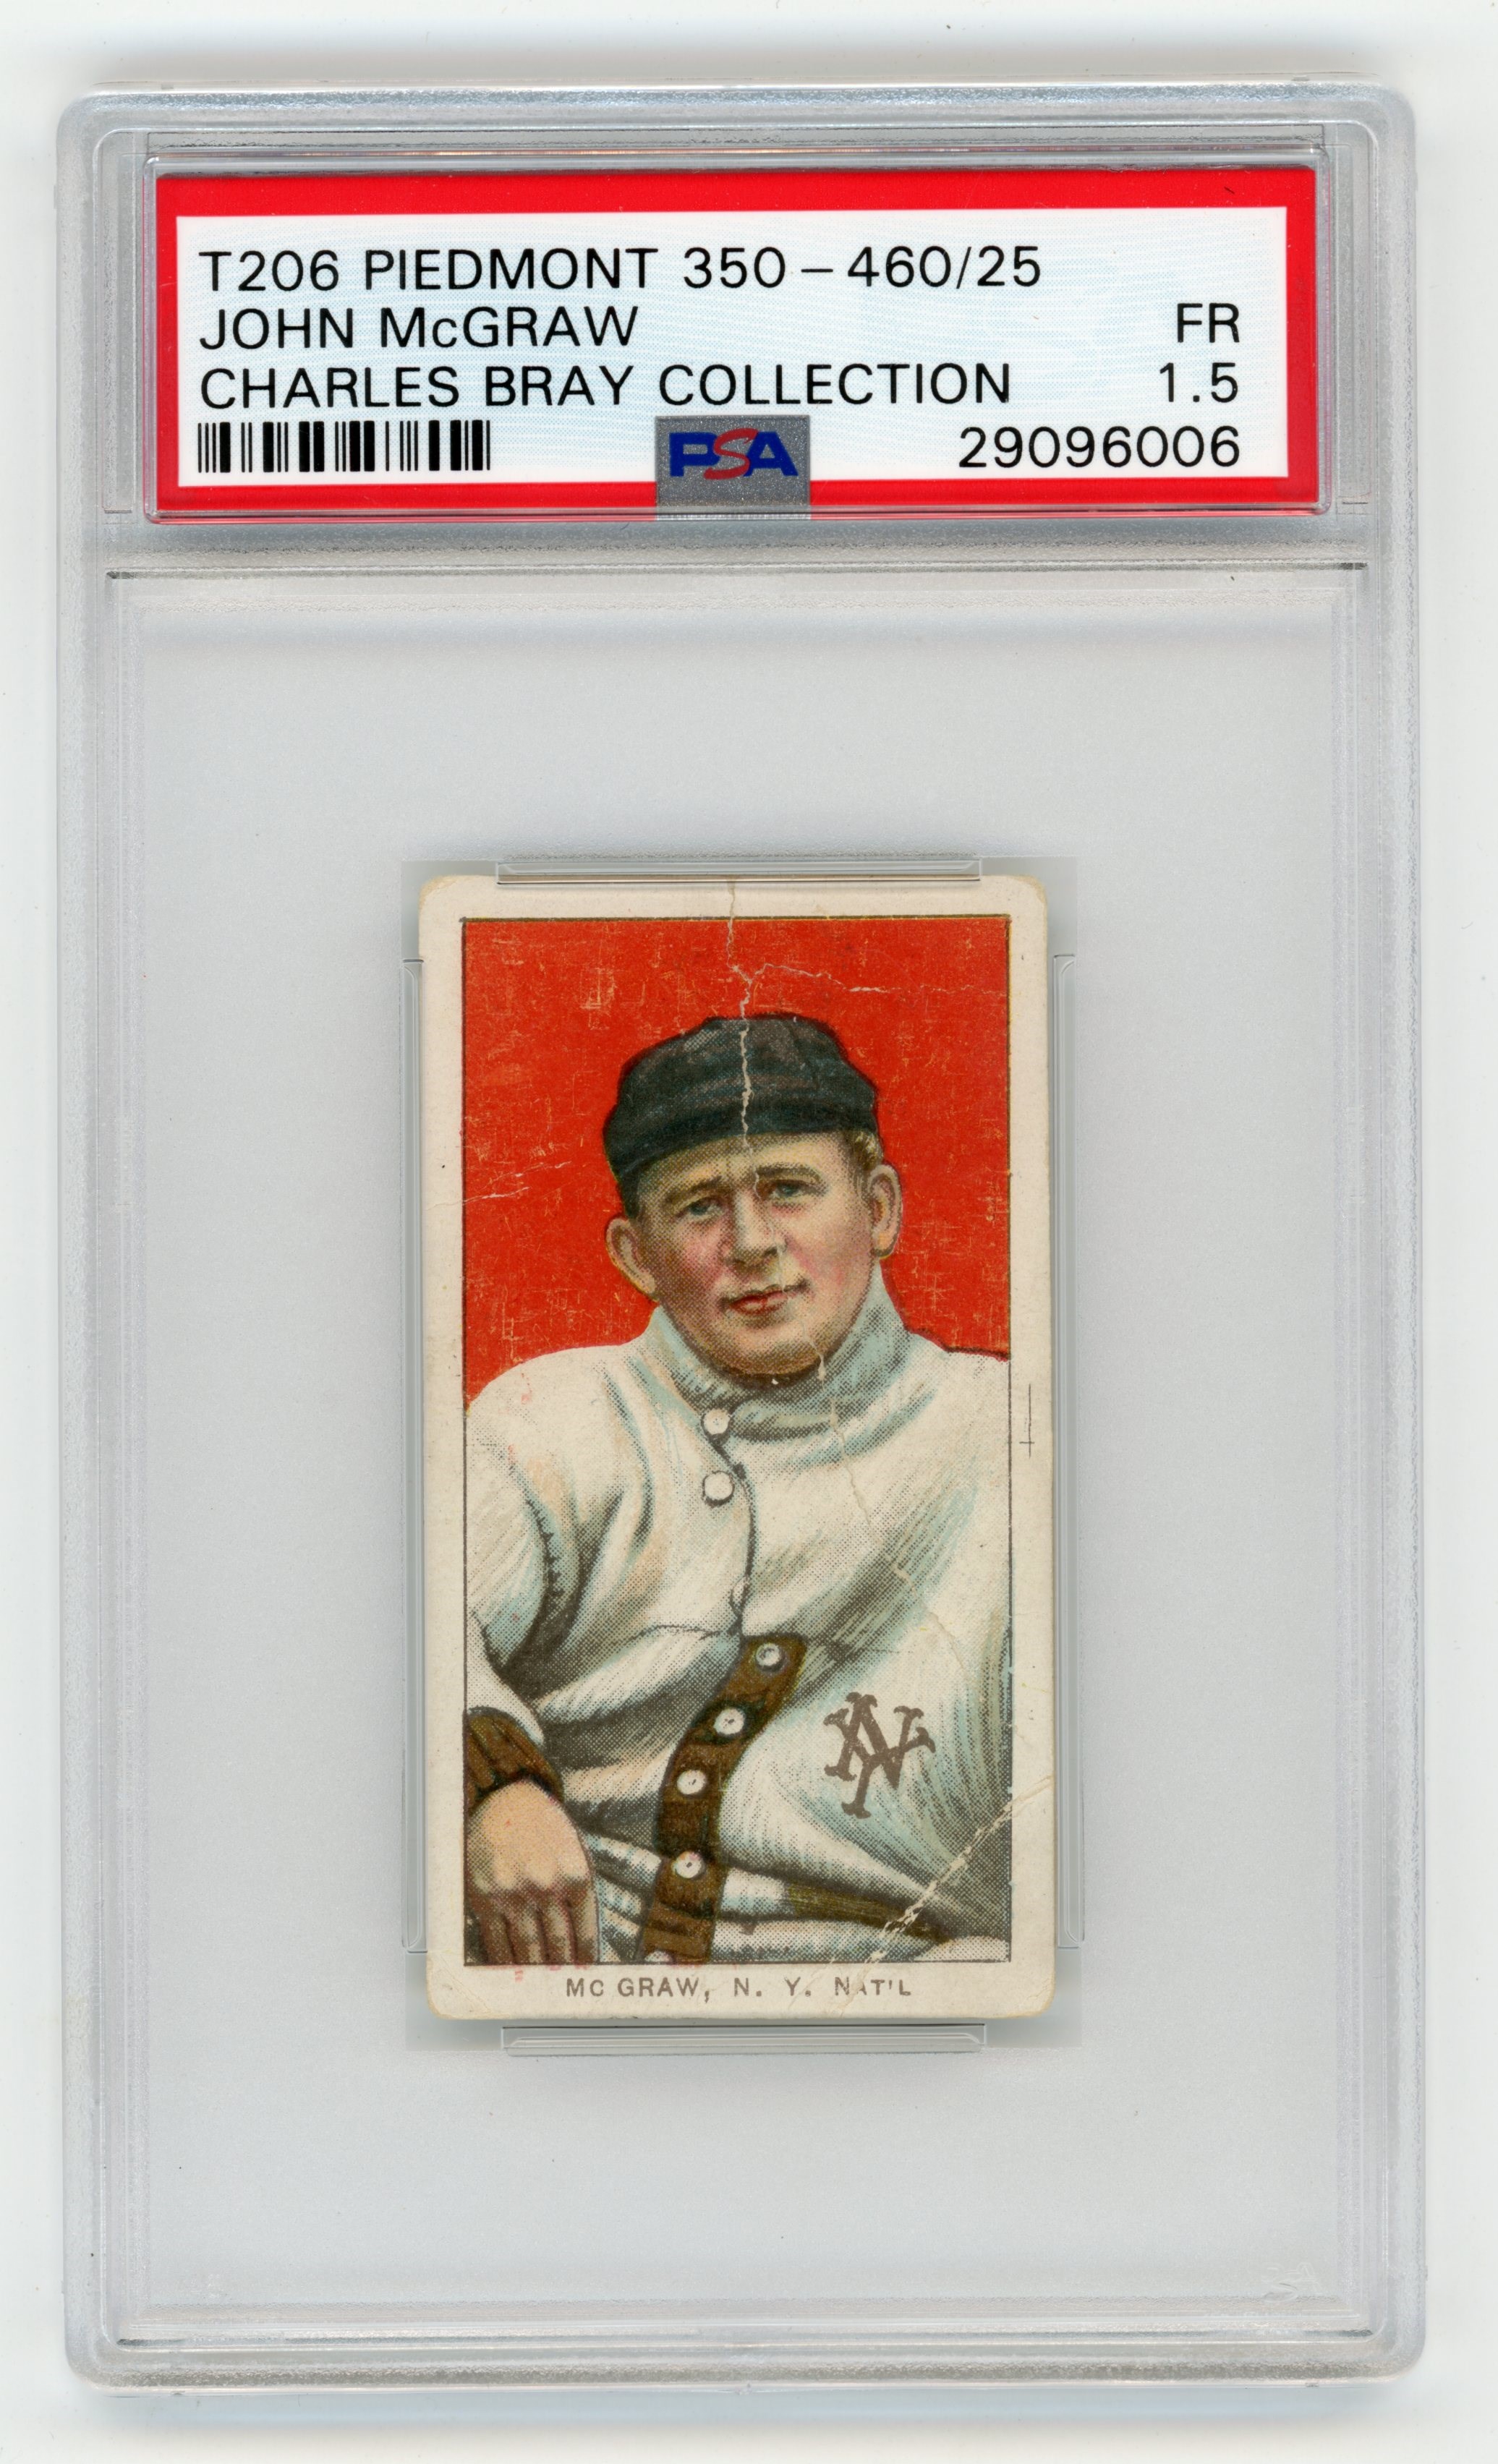 - T206 Piedmont 350-460/25 John McGraw PSA 1.5 From Charles Bray Collection